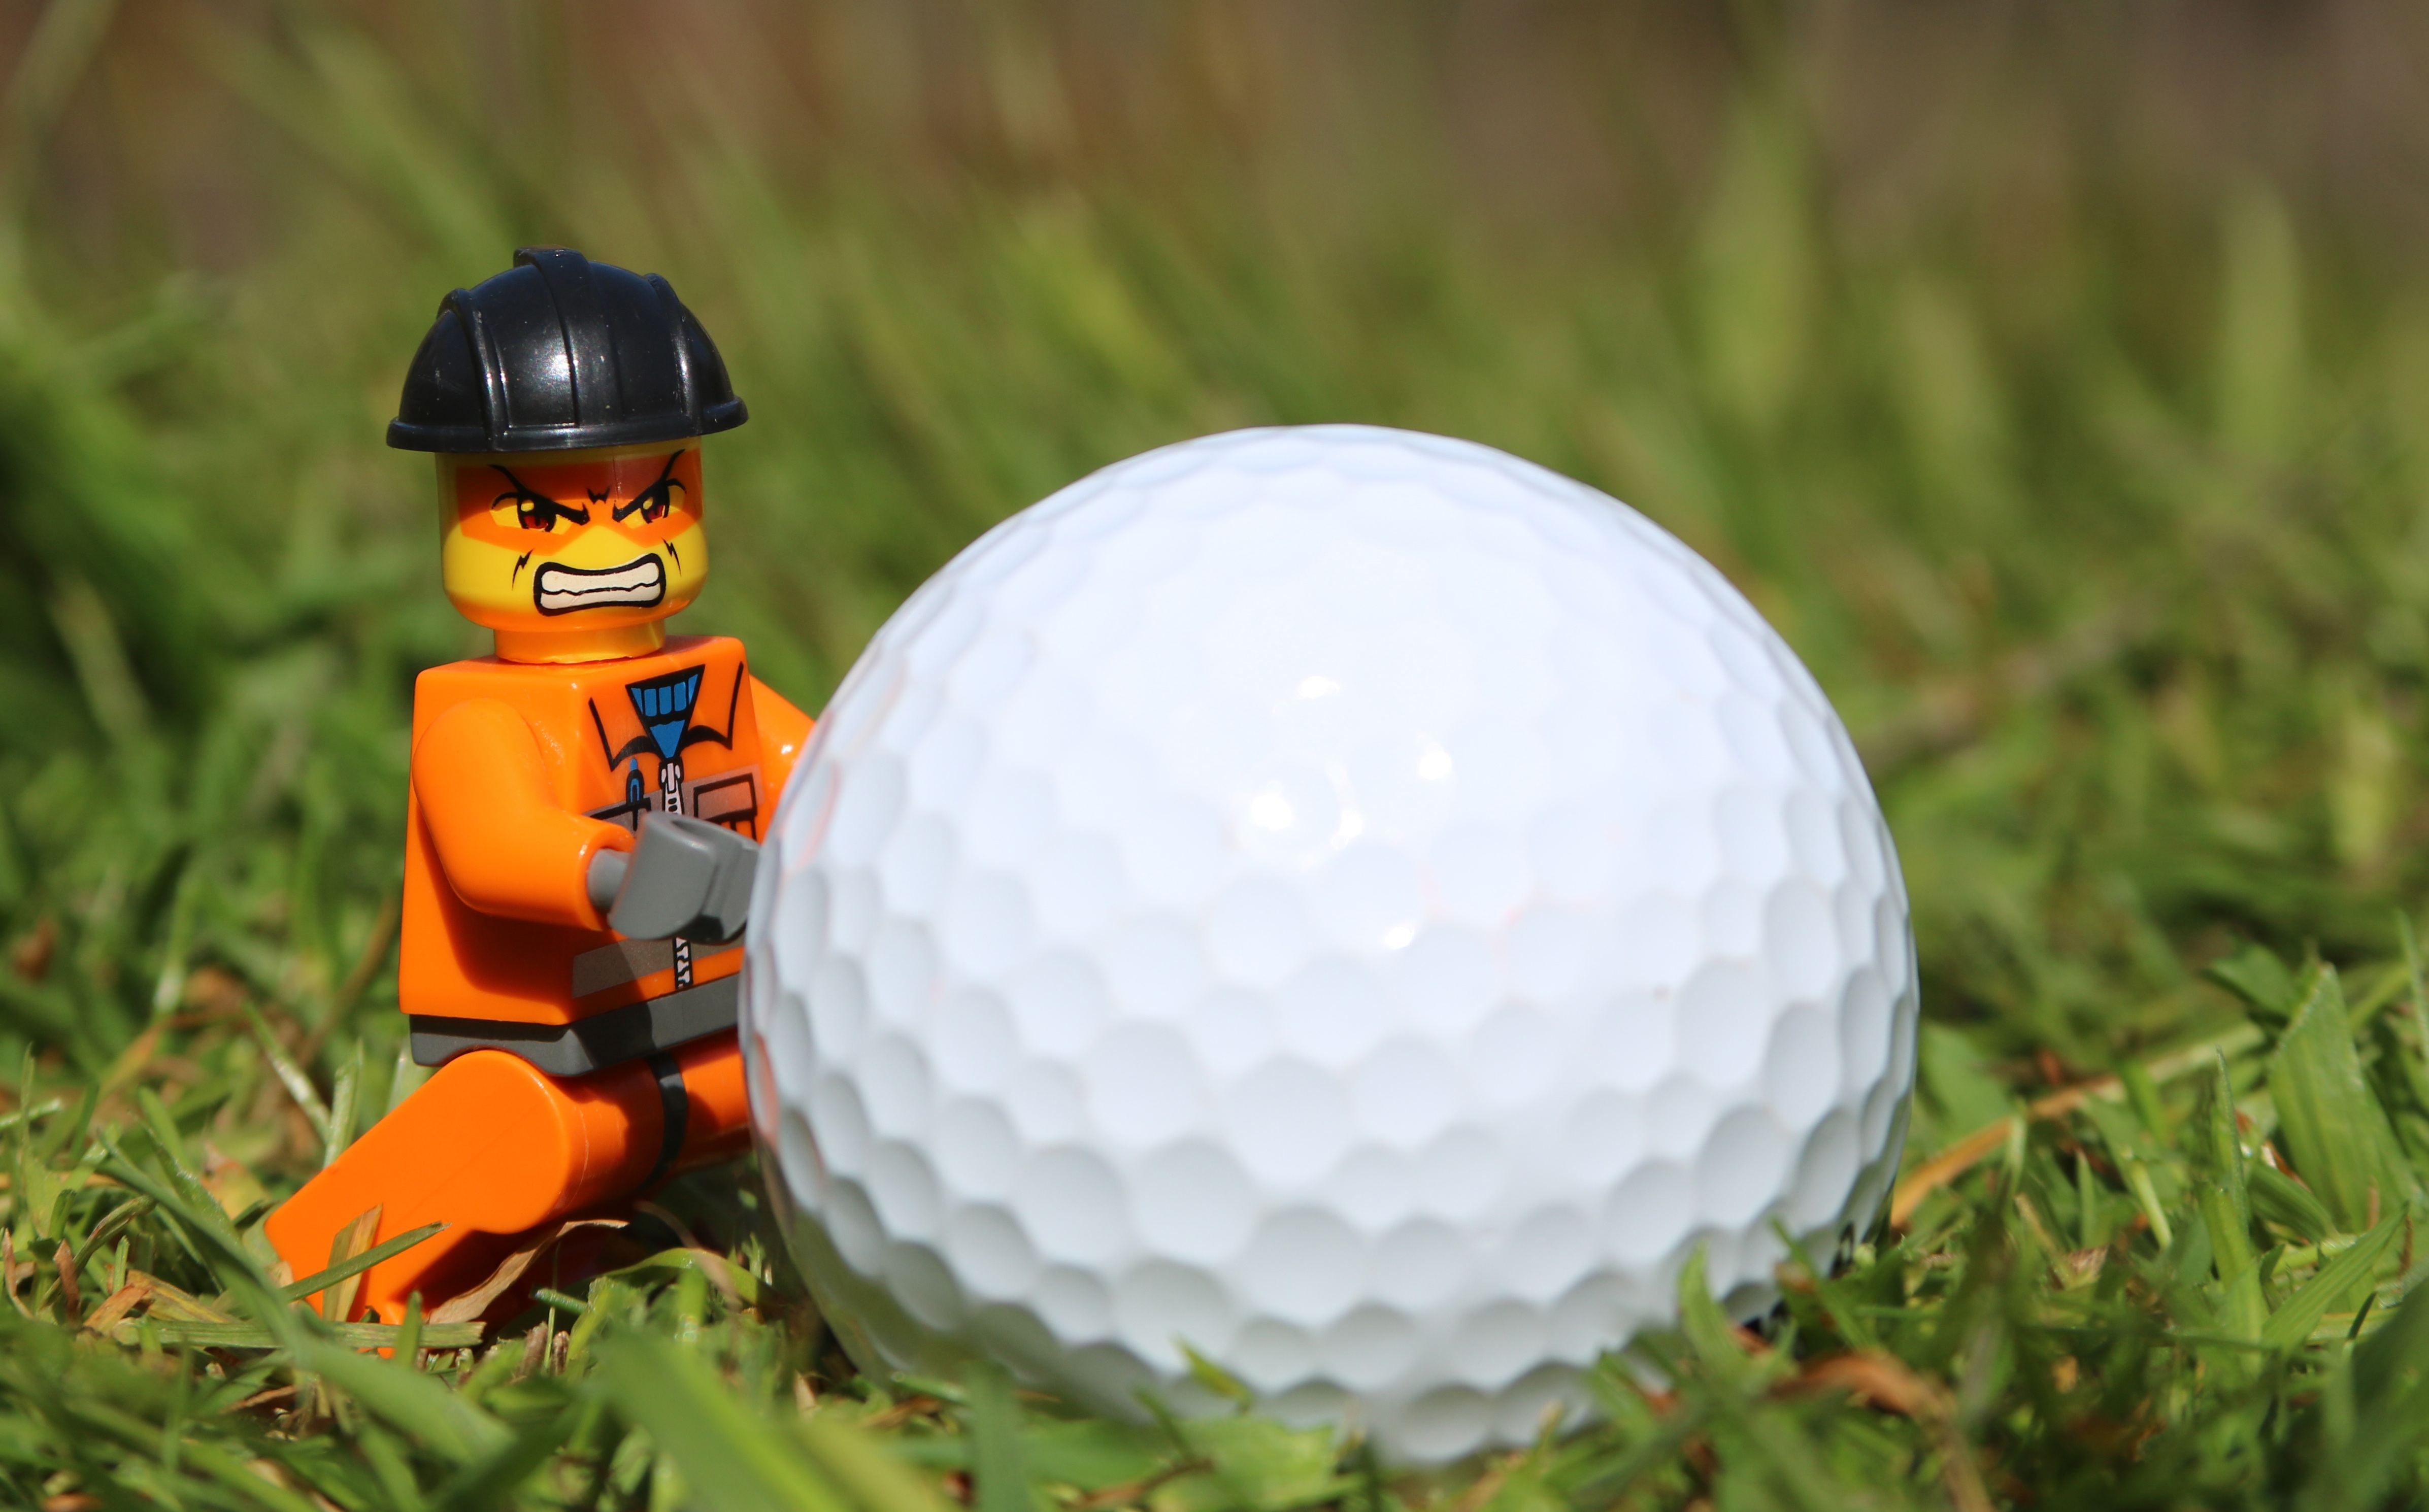 products, lego, figurine, golf ball, grass, toy